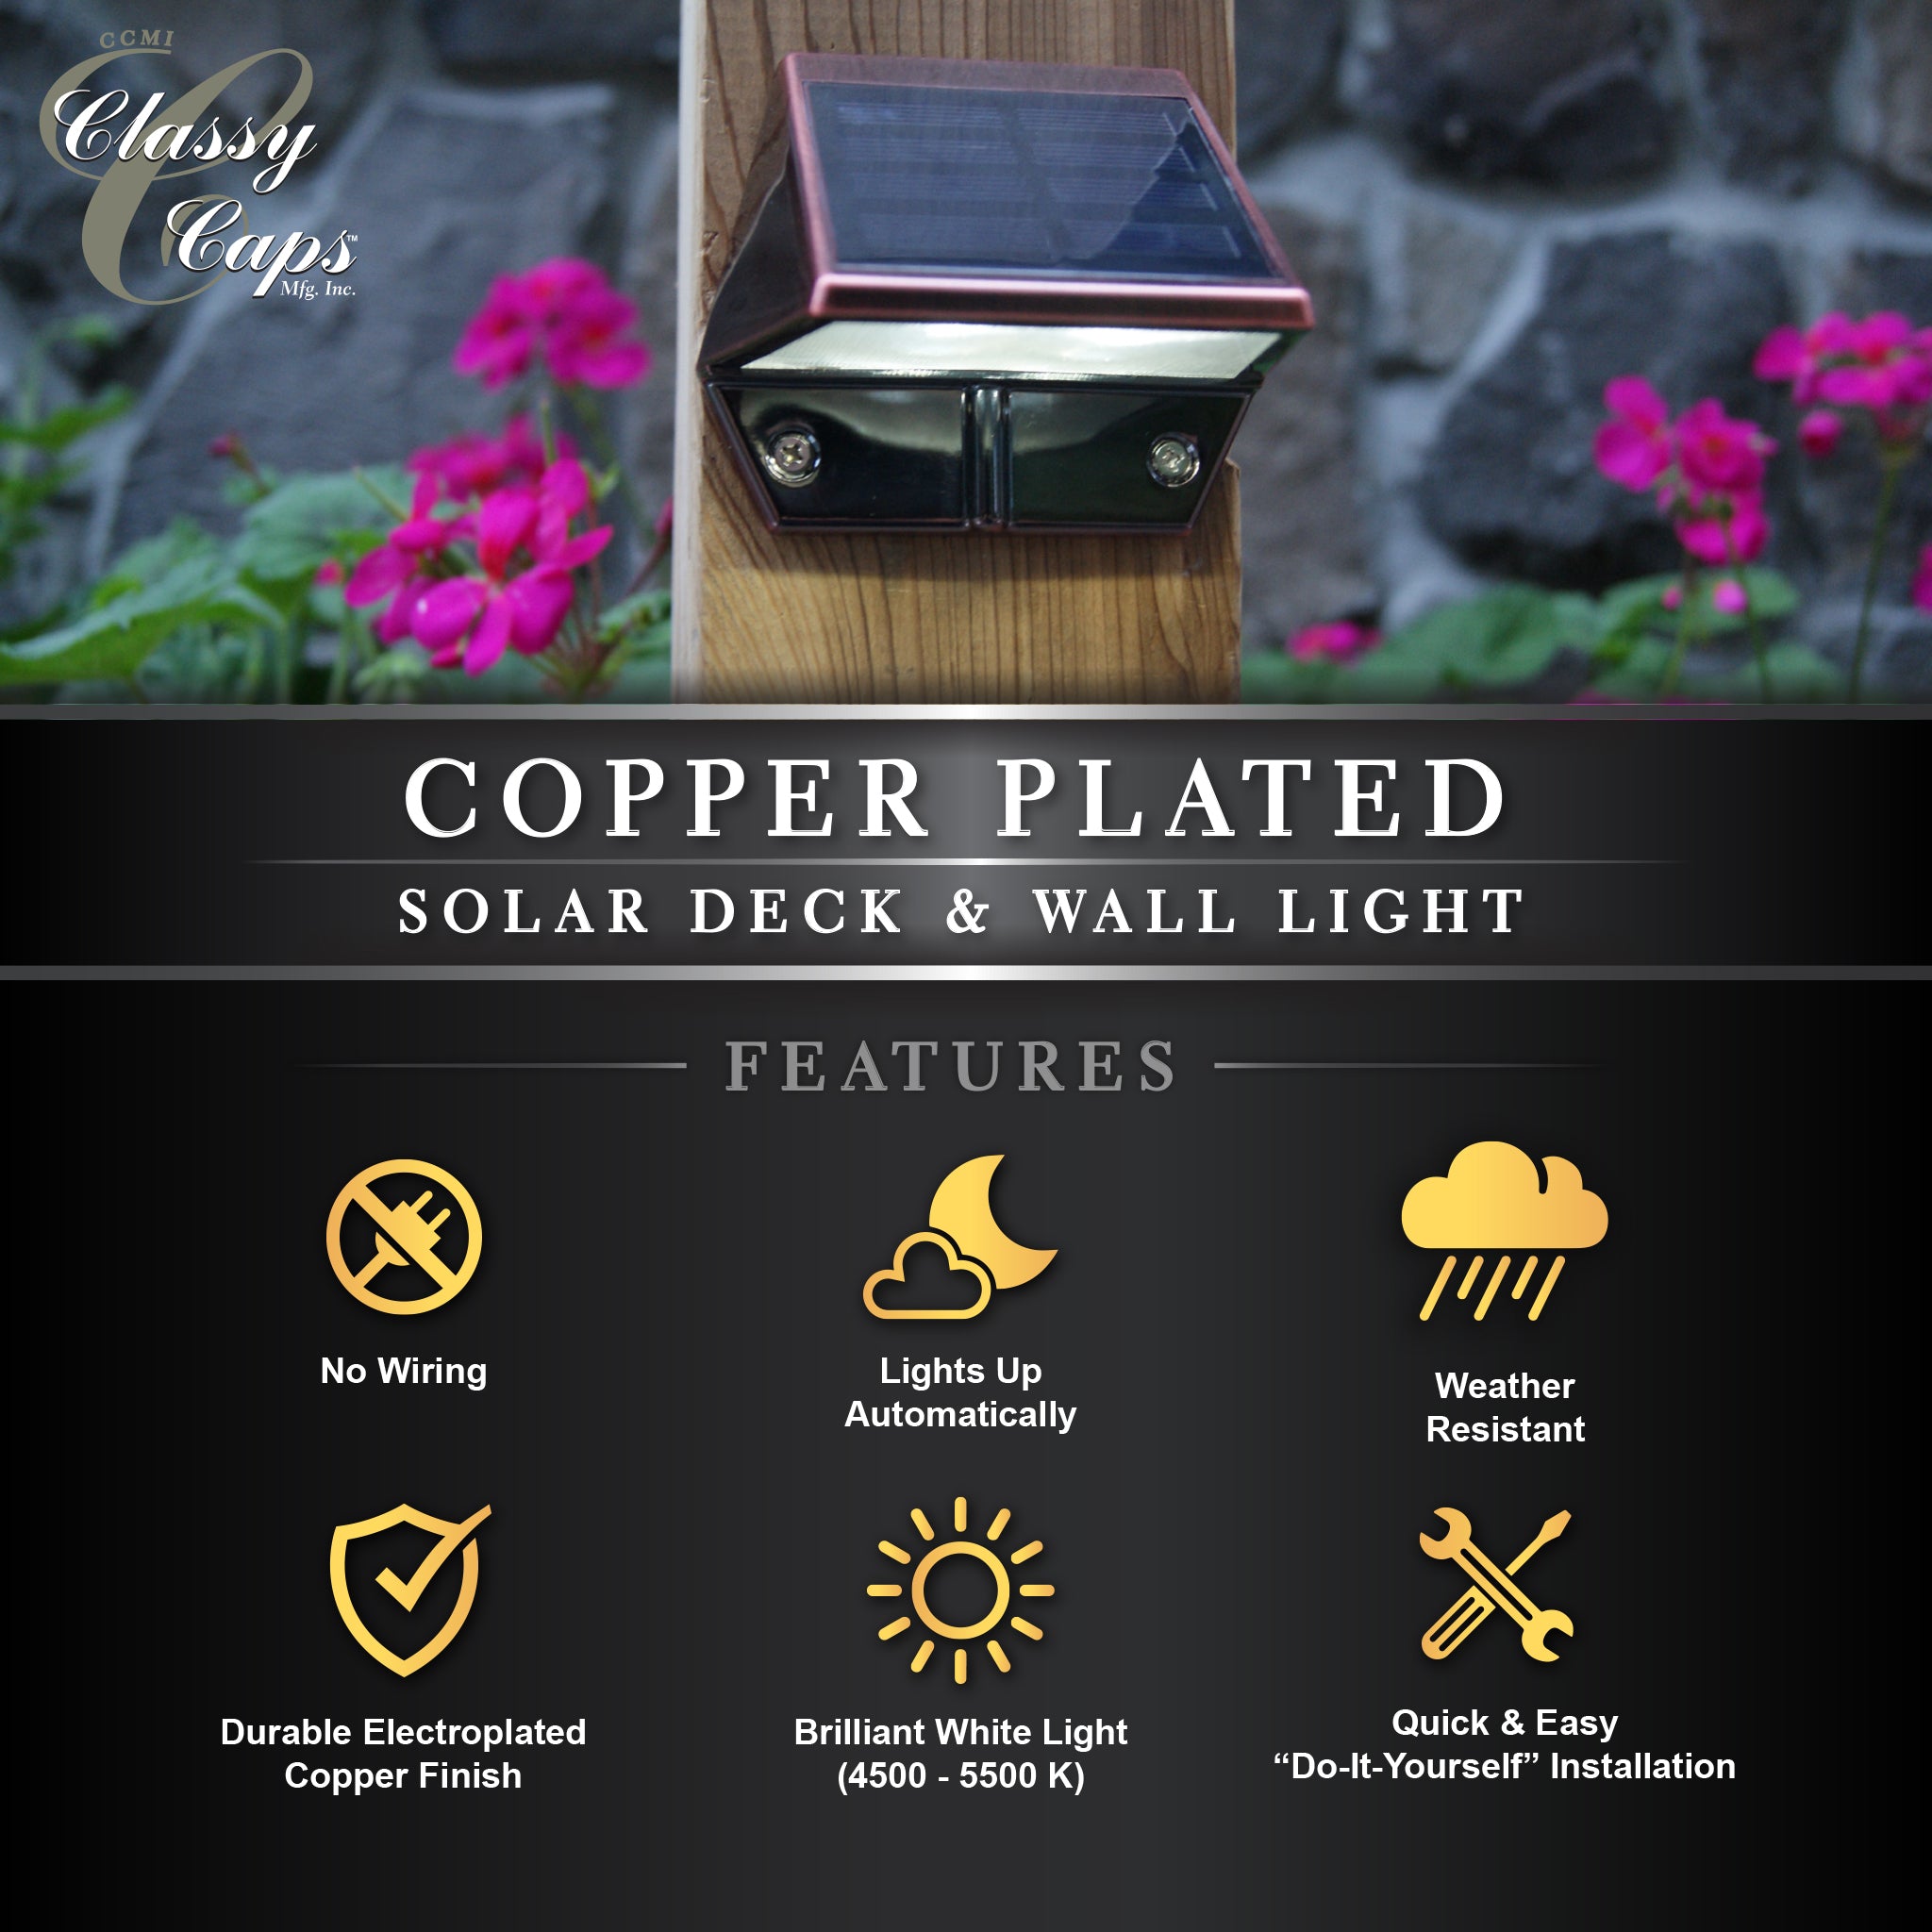 Copper Plated Deck & Wall Light